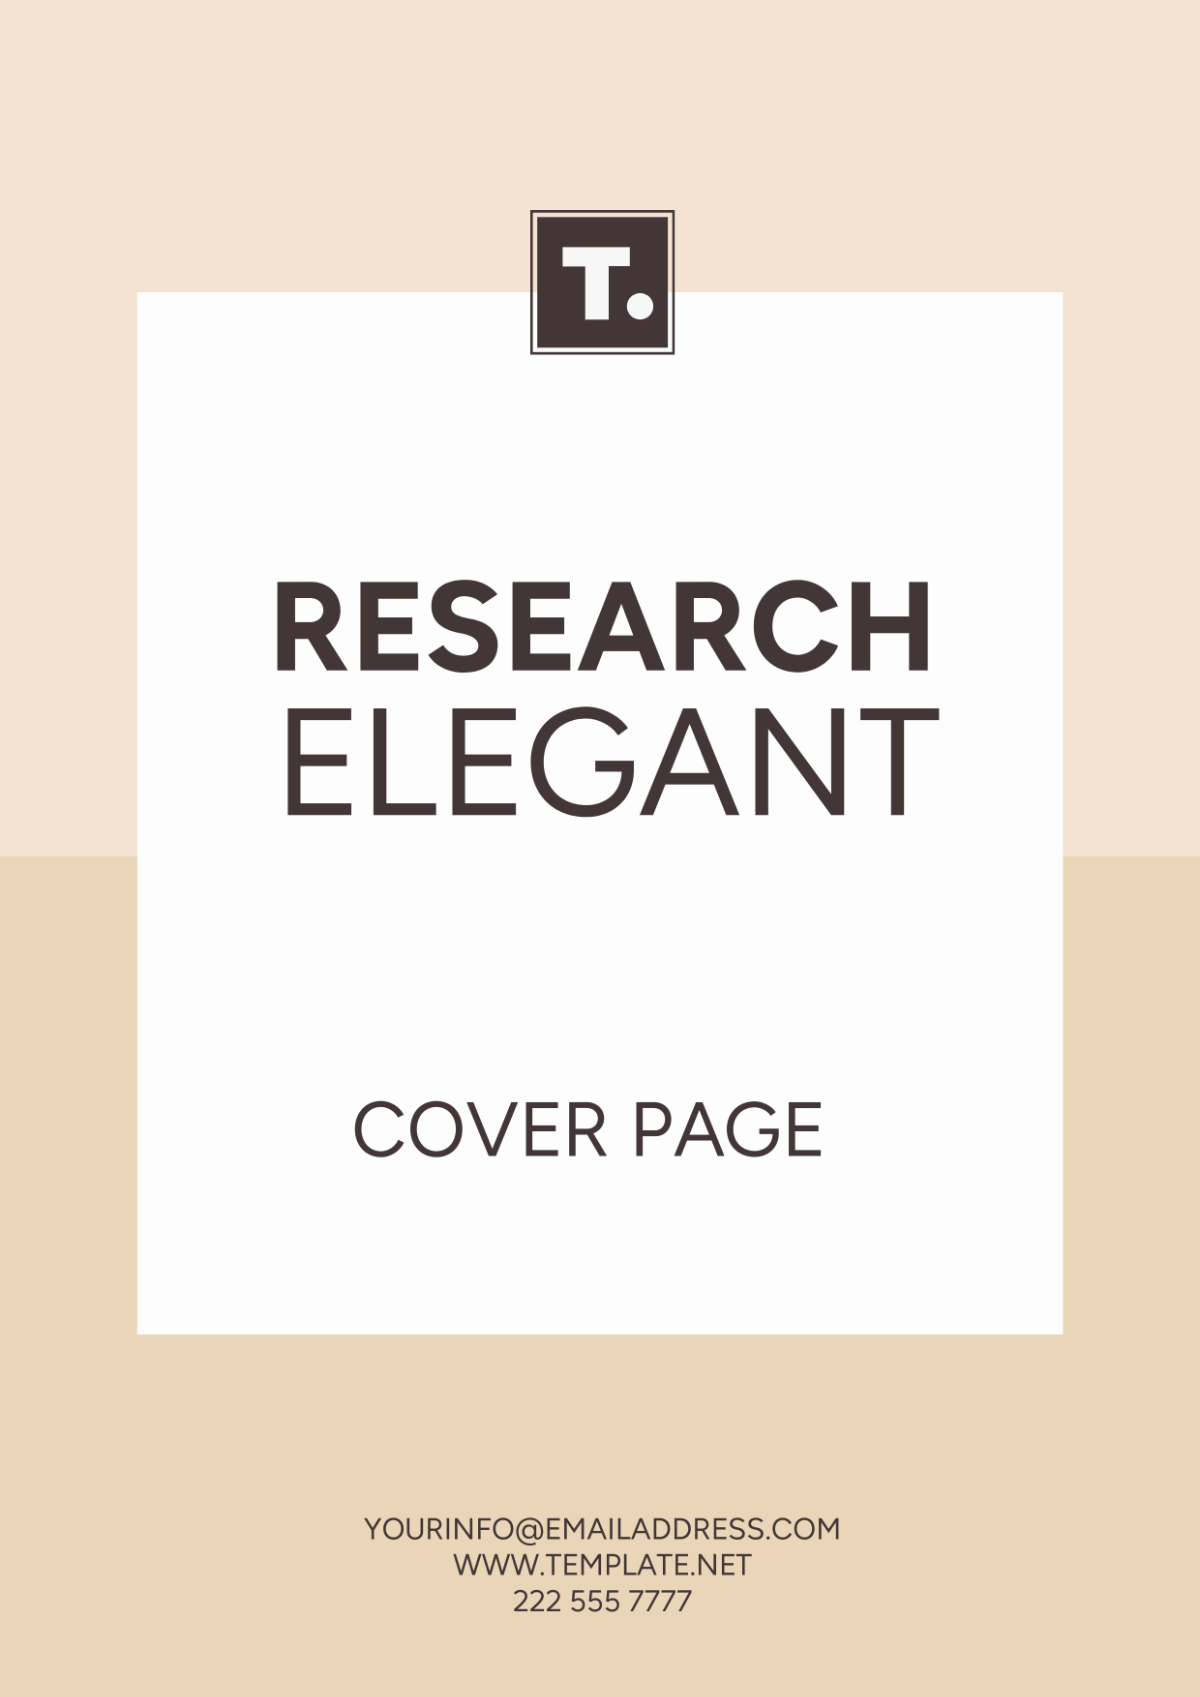 Research Elegant Cover Page Template